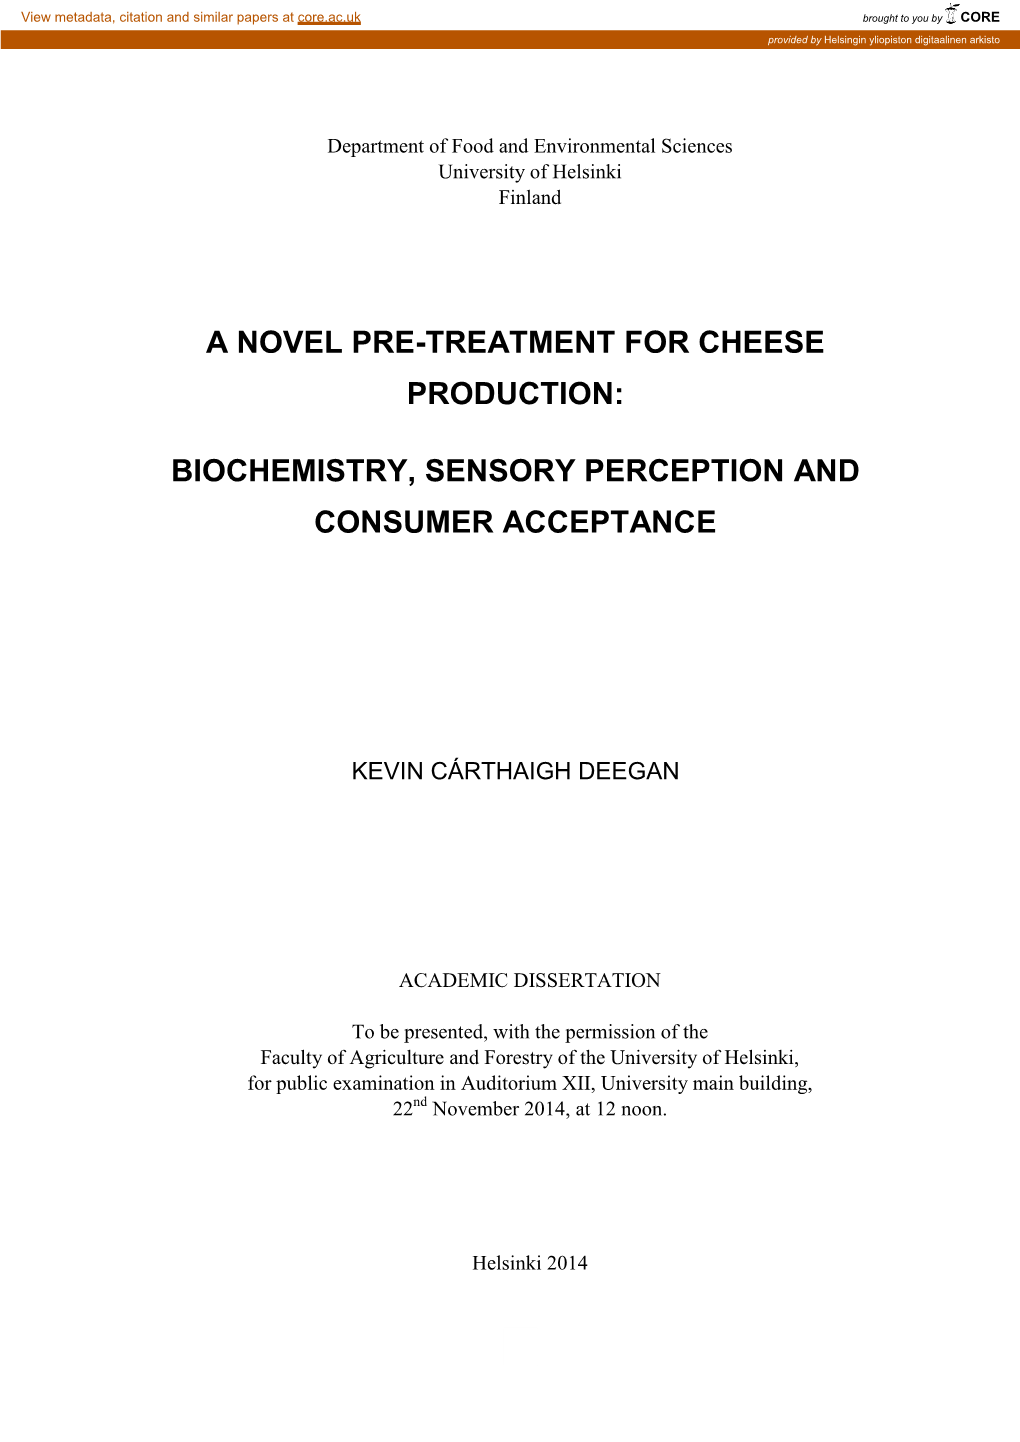 A Novel Pre-Treatment for Cheese Production